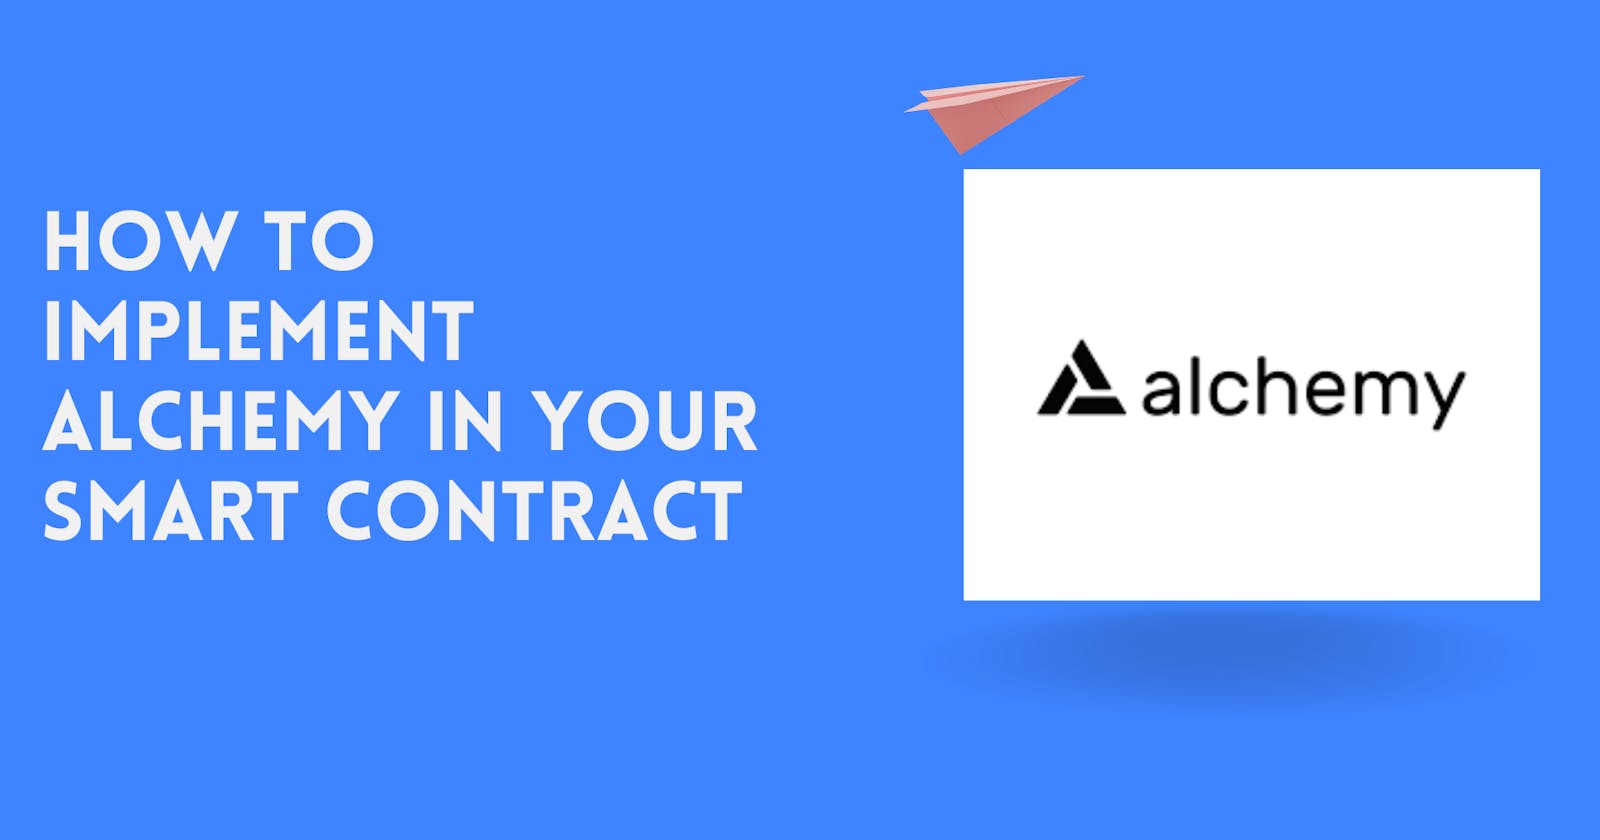 How to implement Alchemy in your smart contract